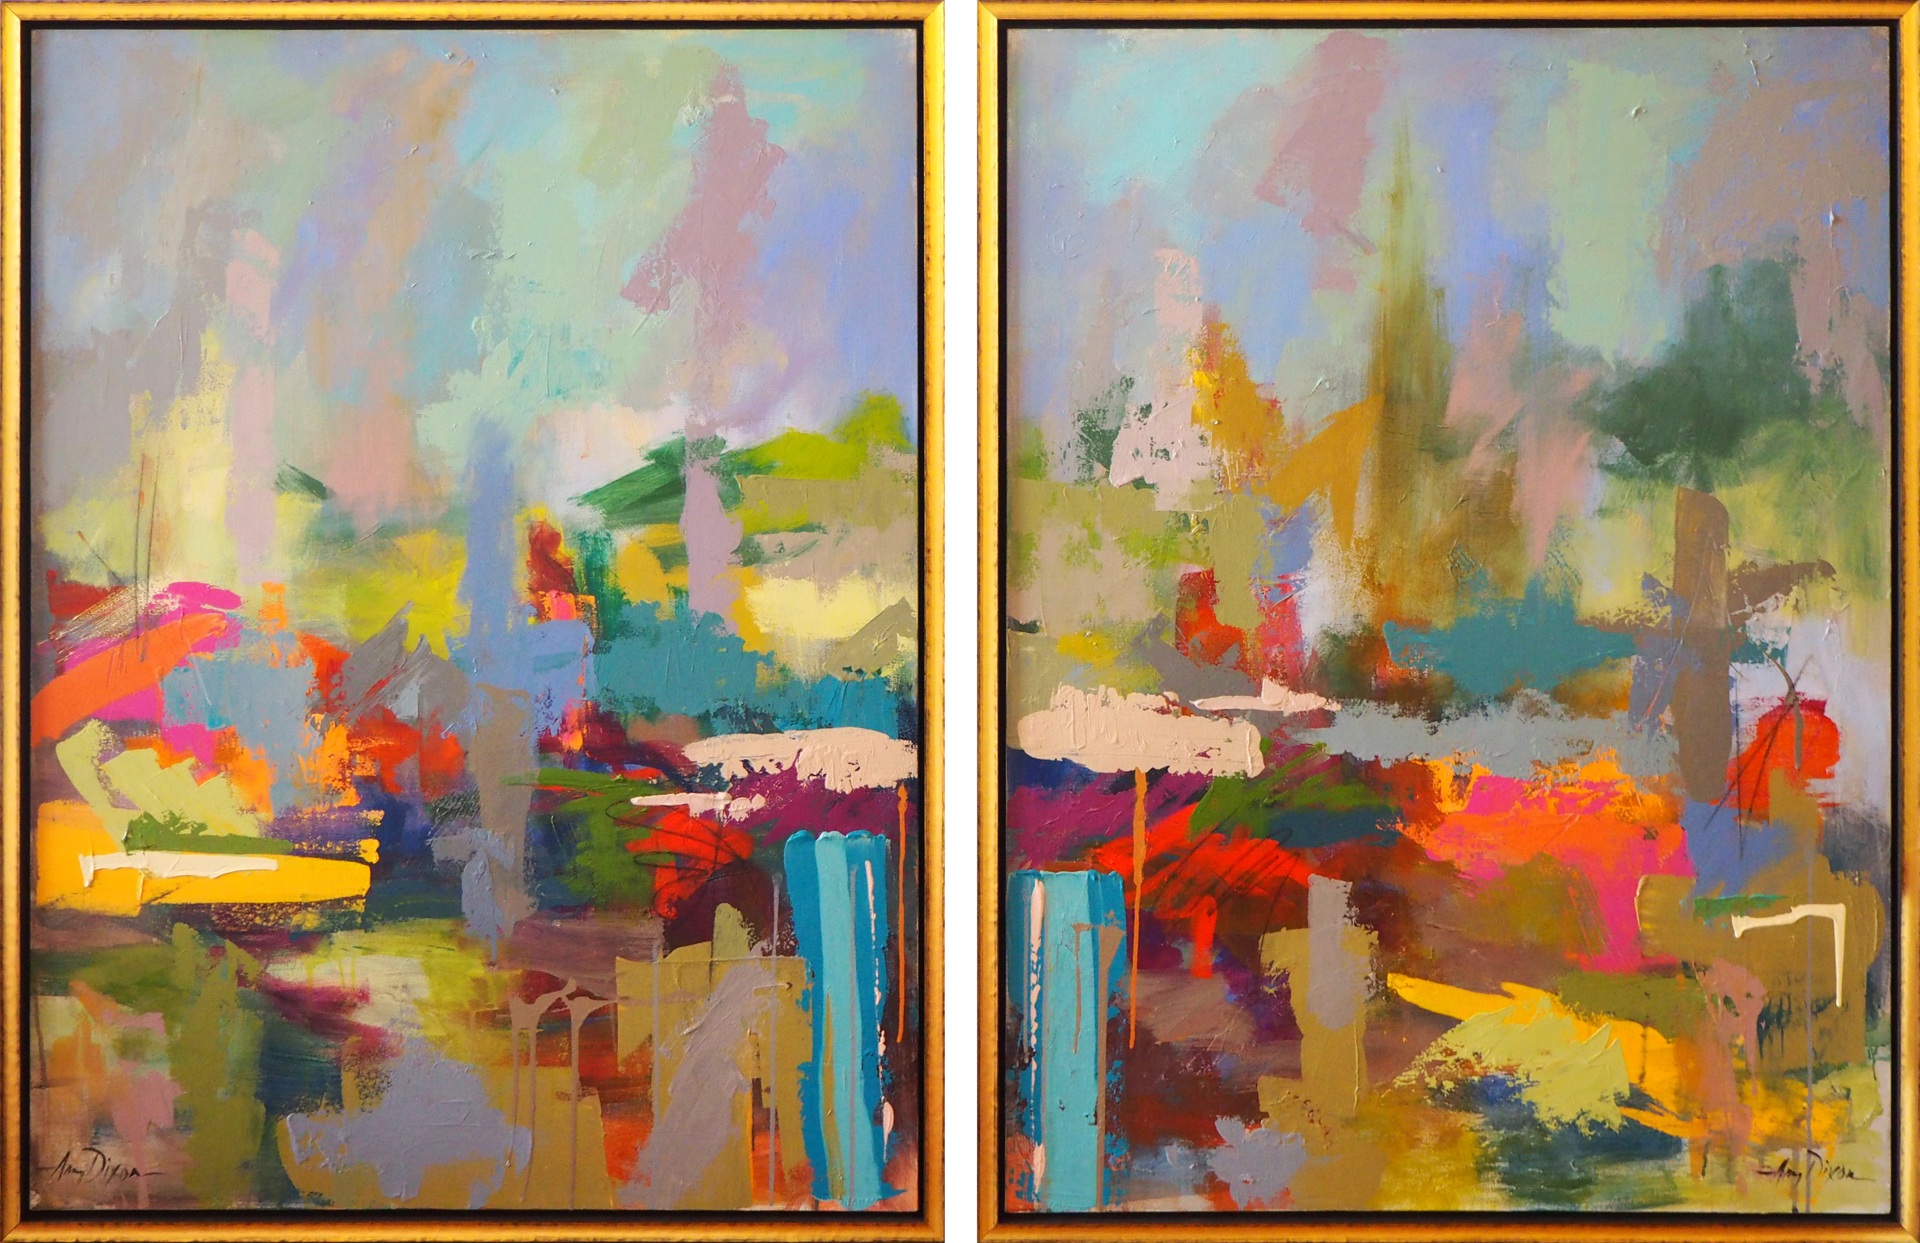 One Minute Vacation (Diptych) by Amy Dixon